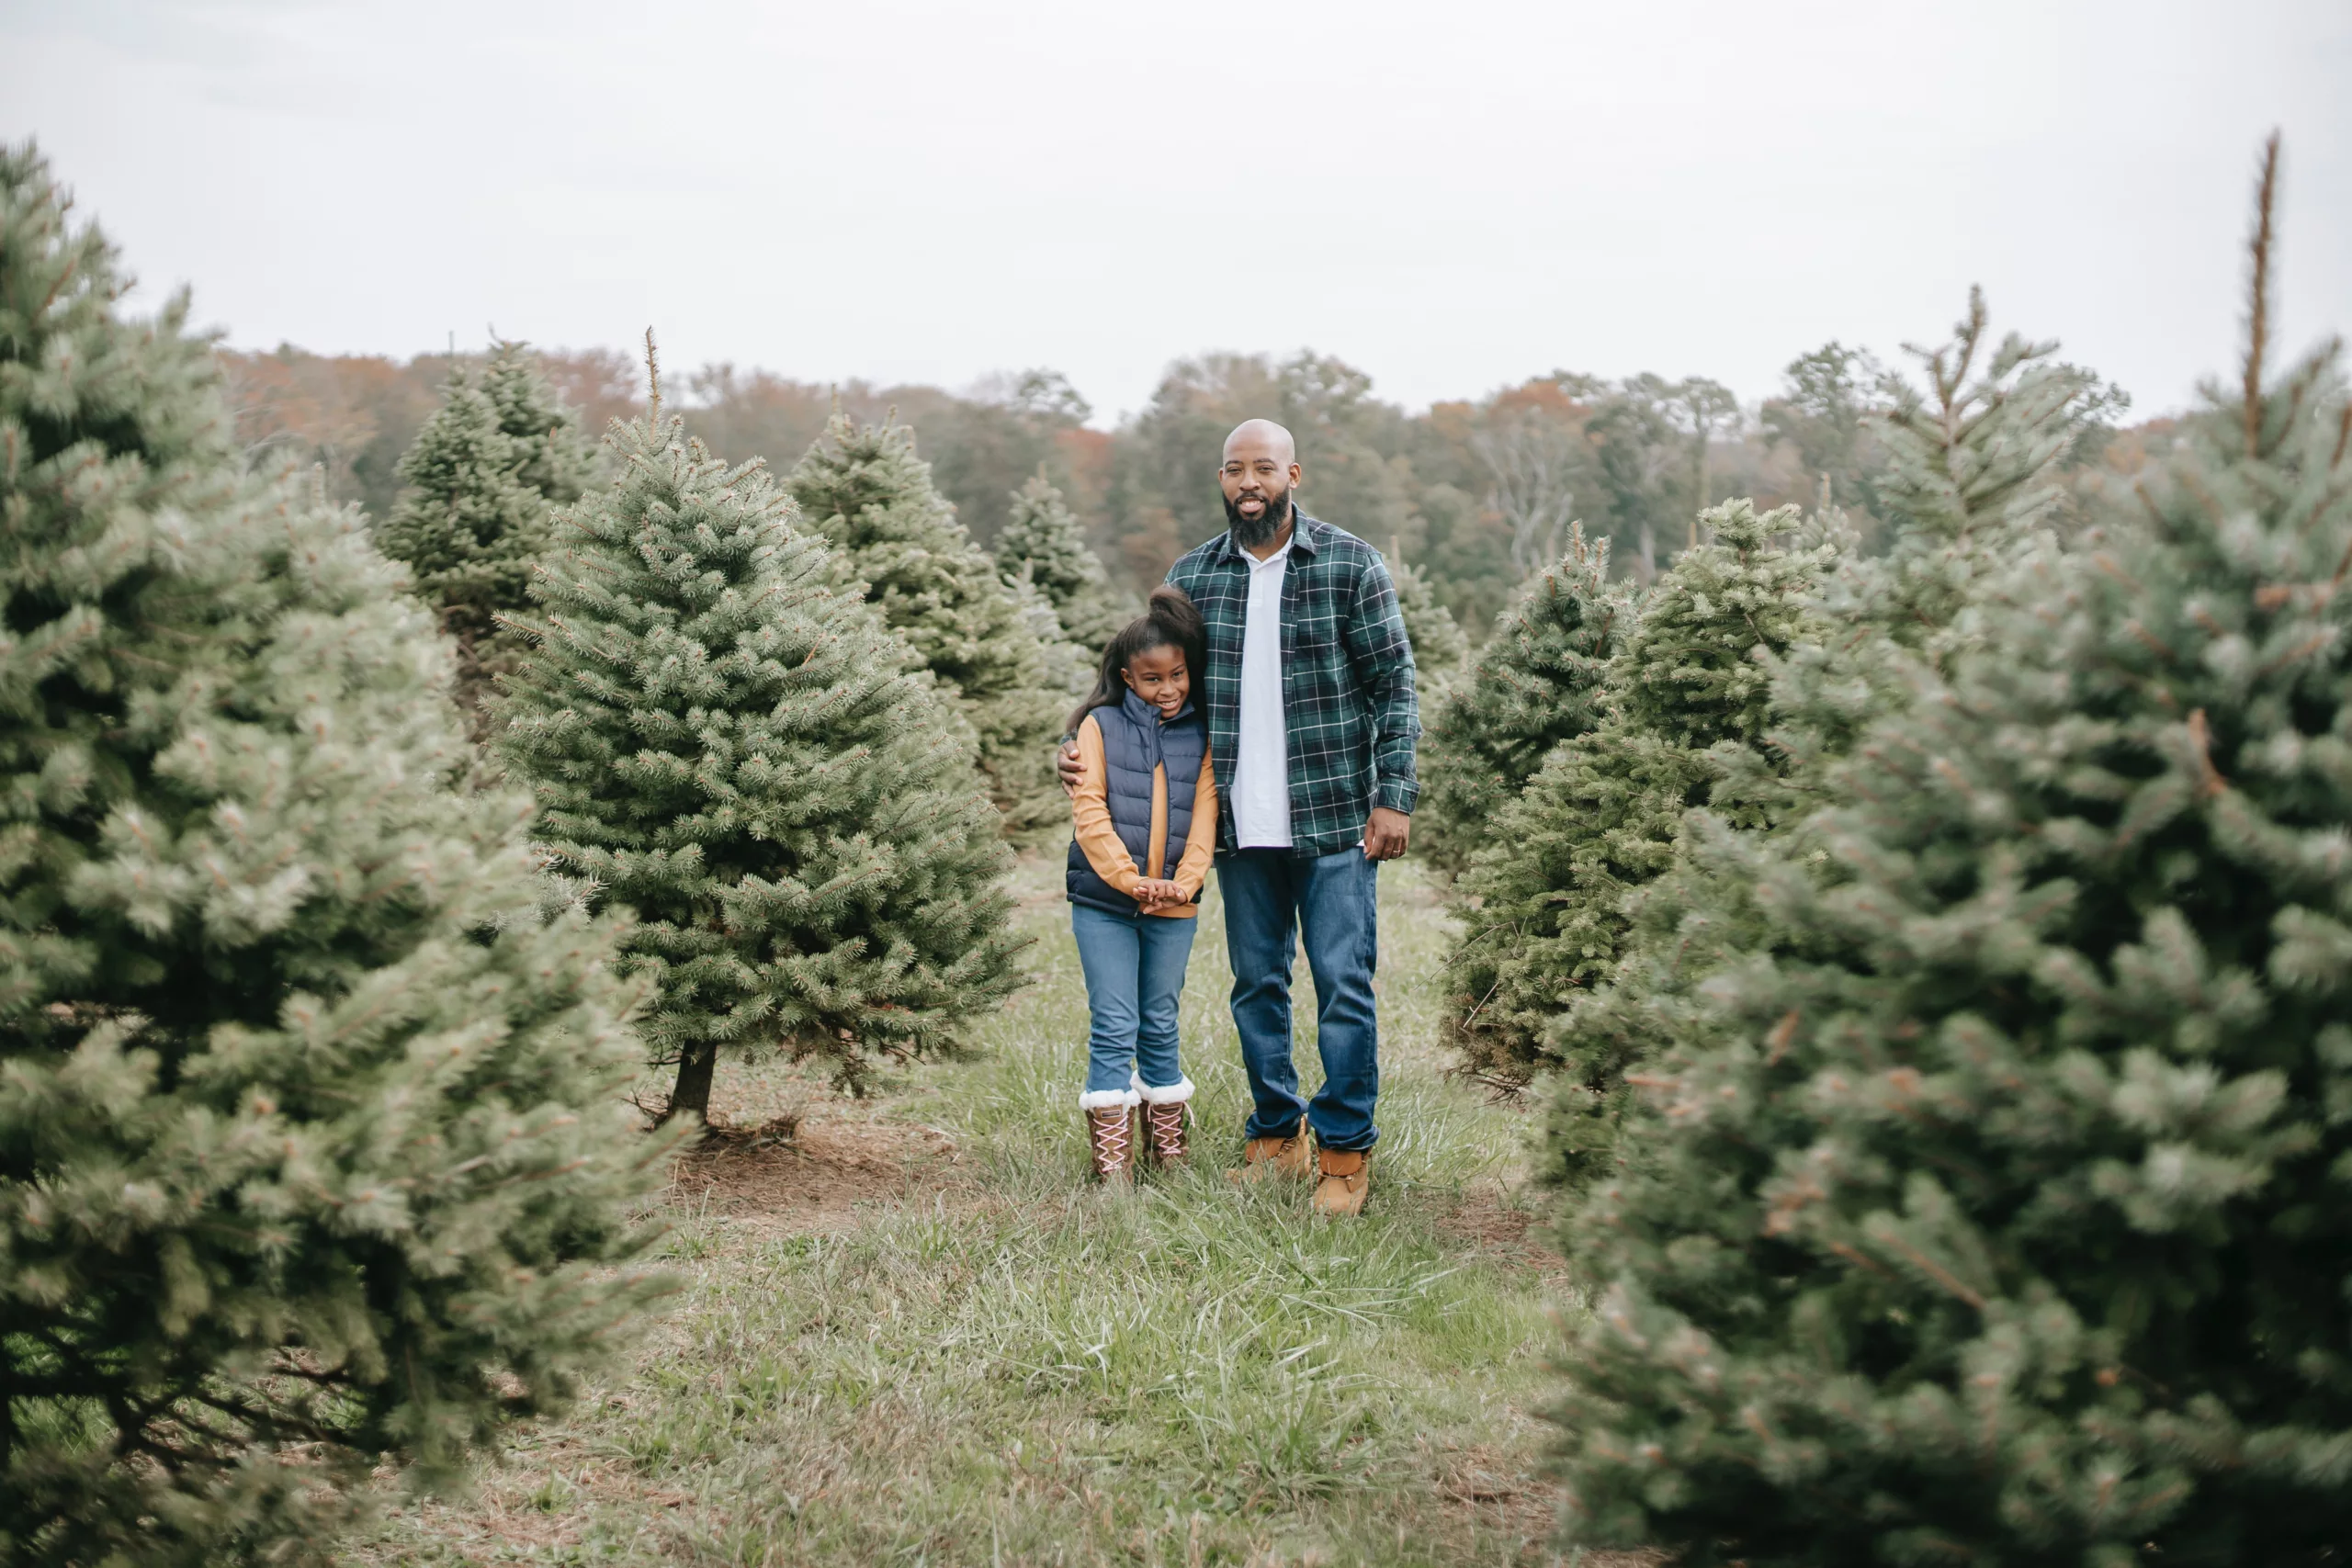 The Best 22 Cut-Your-Own Christmas Tree Farms Near NYC